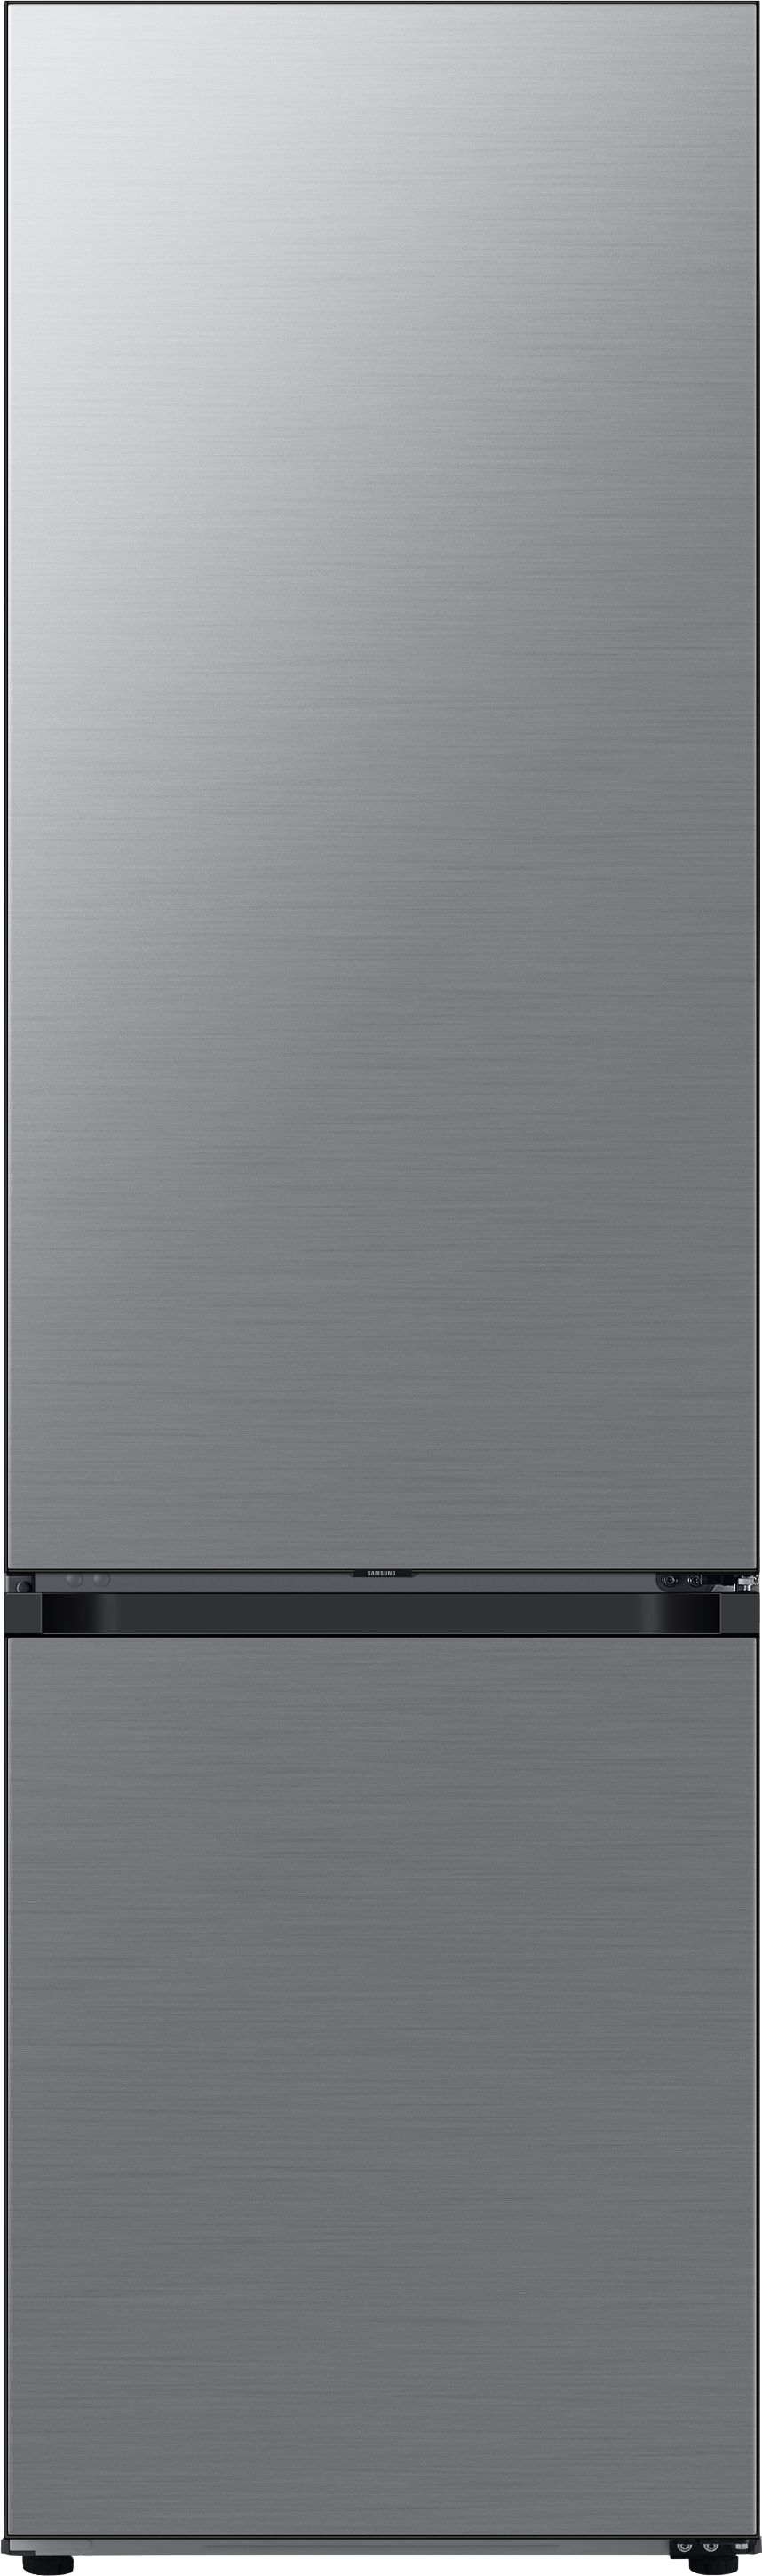 Samsung Bespoke RB38A7CGTS9 70/30 Frost Free Fridge Freezer - Silver - A Rated, Silver